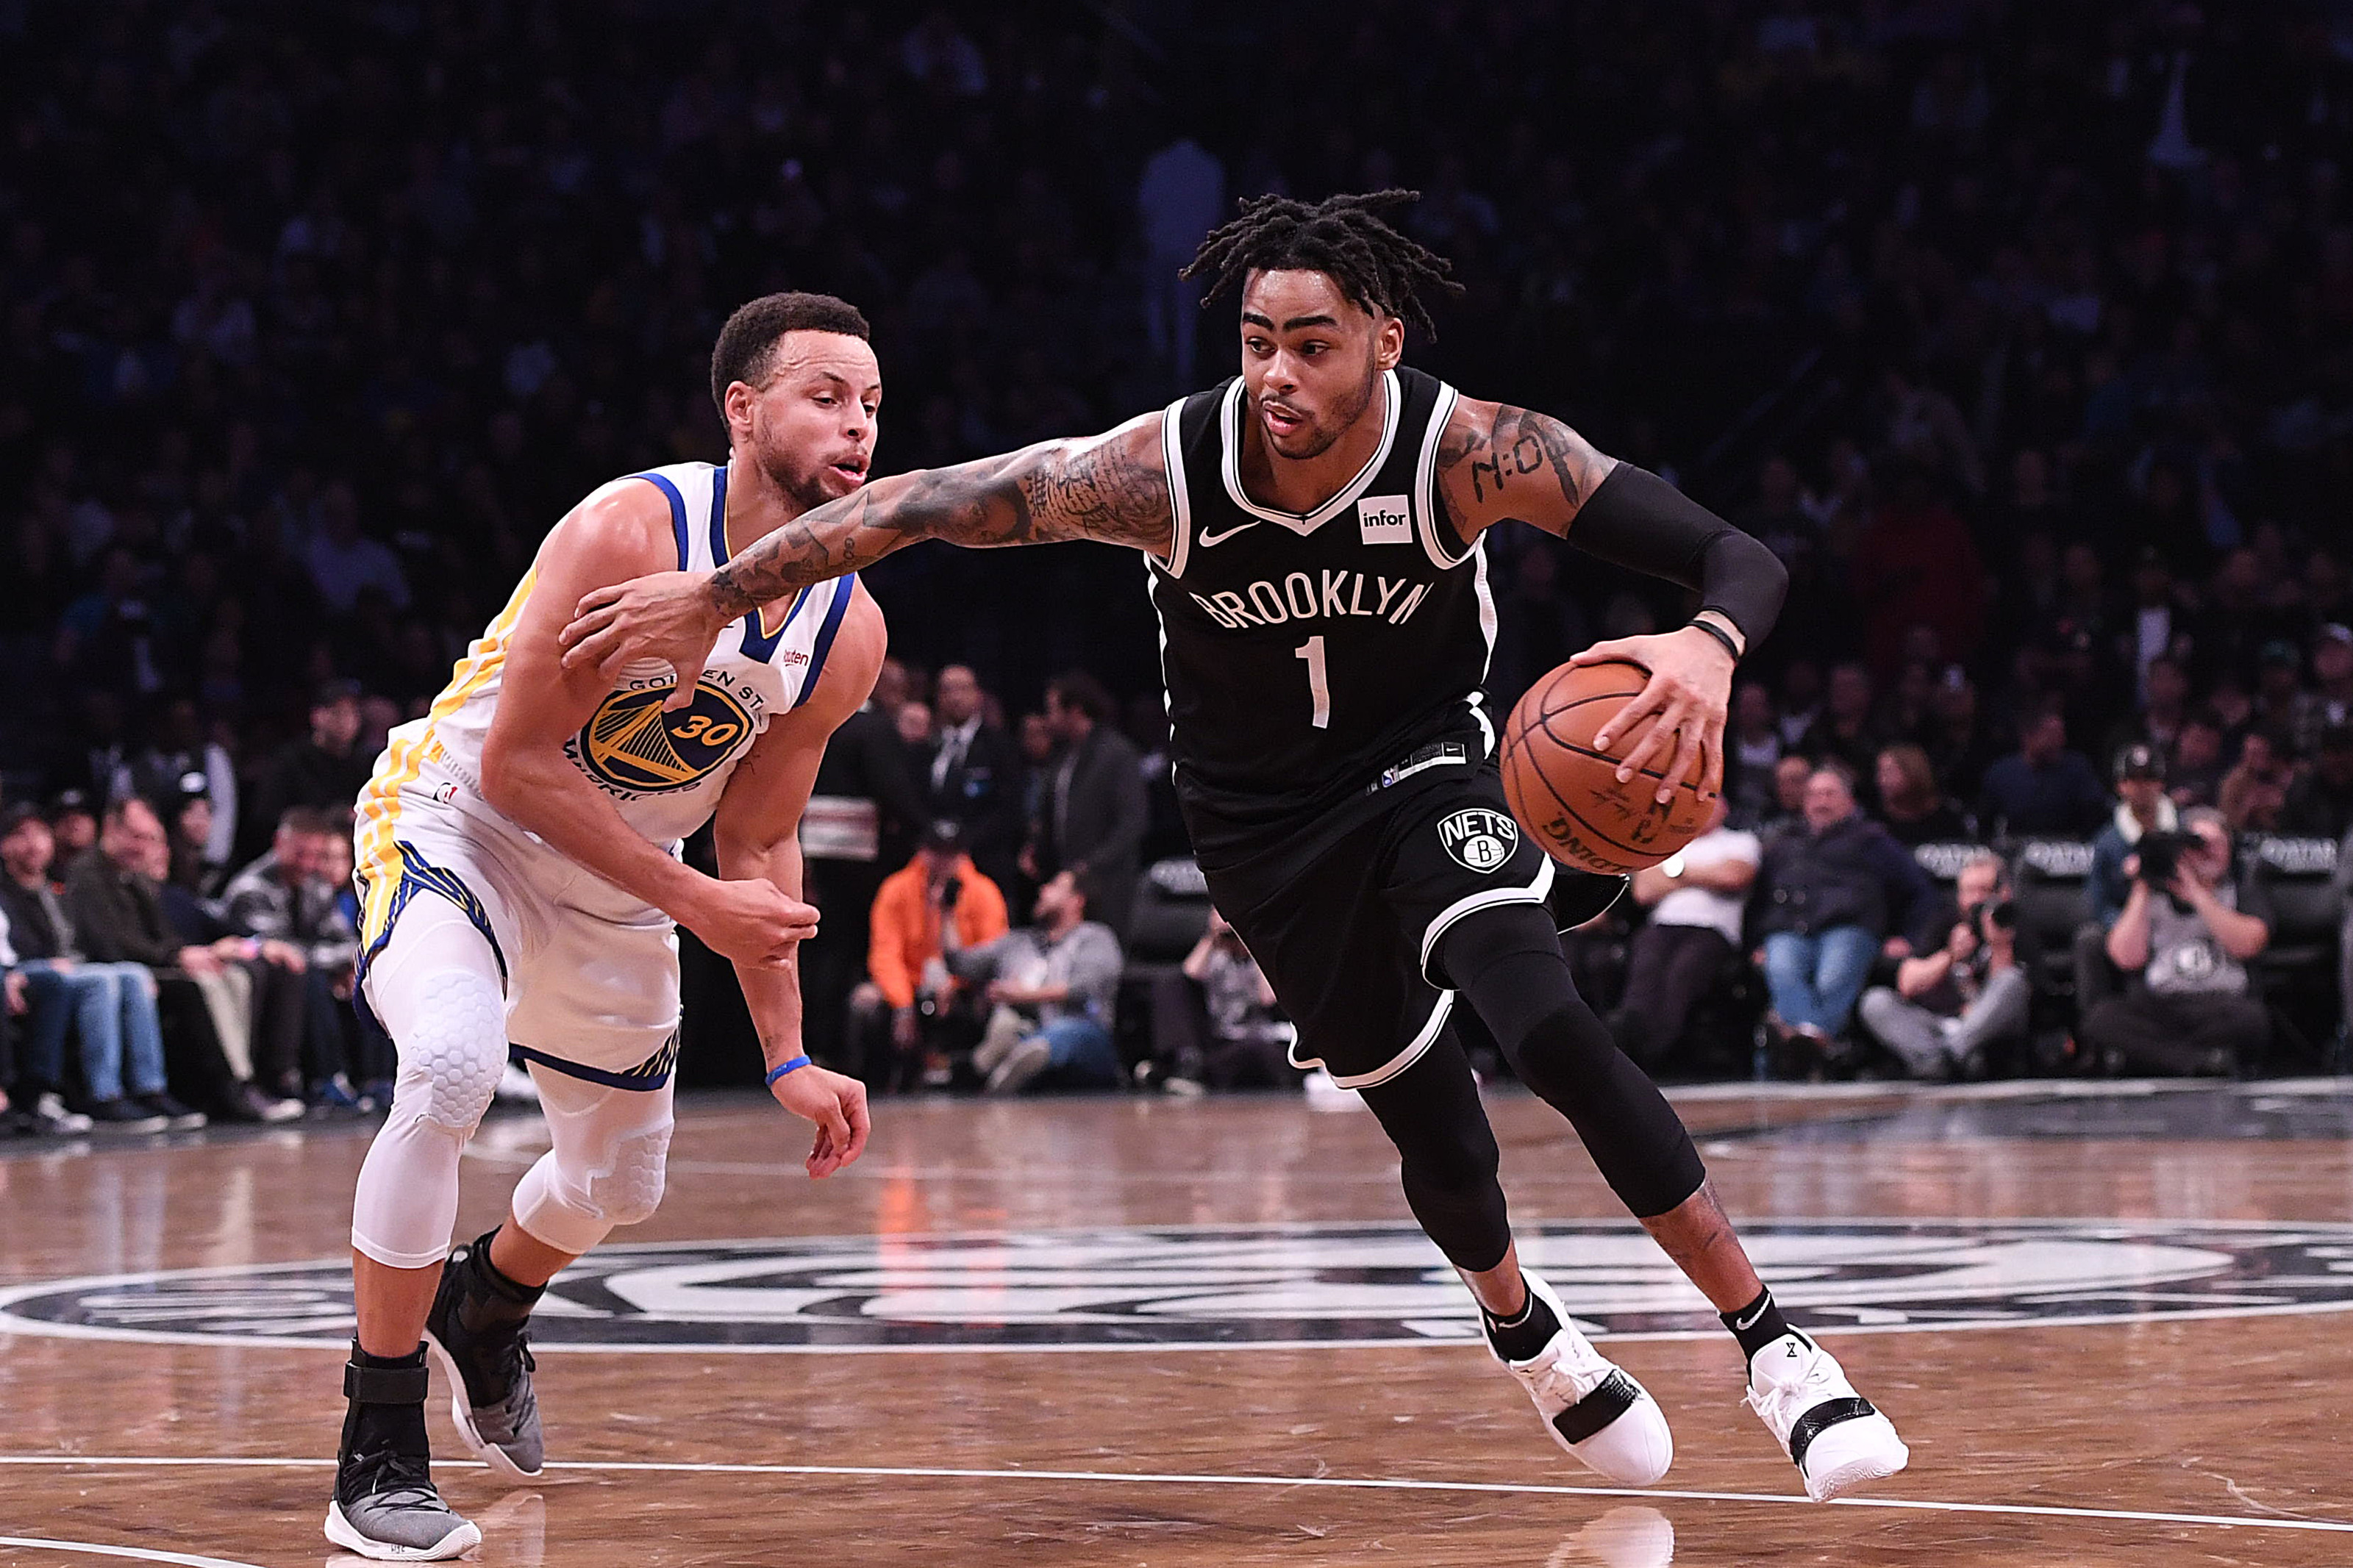 Warriors Agree To Acquire D'Angelo Russell Via Sign-And-Trade